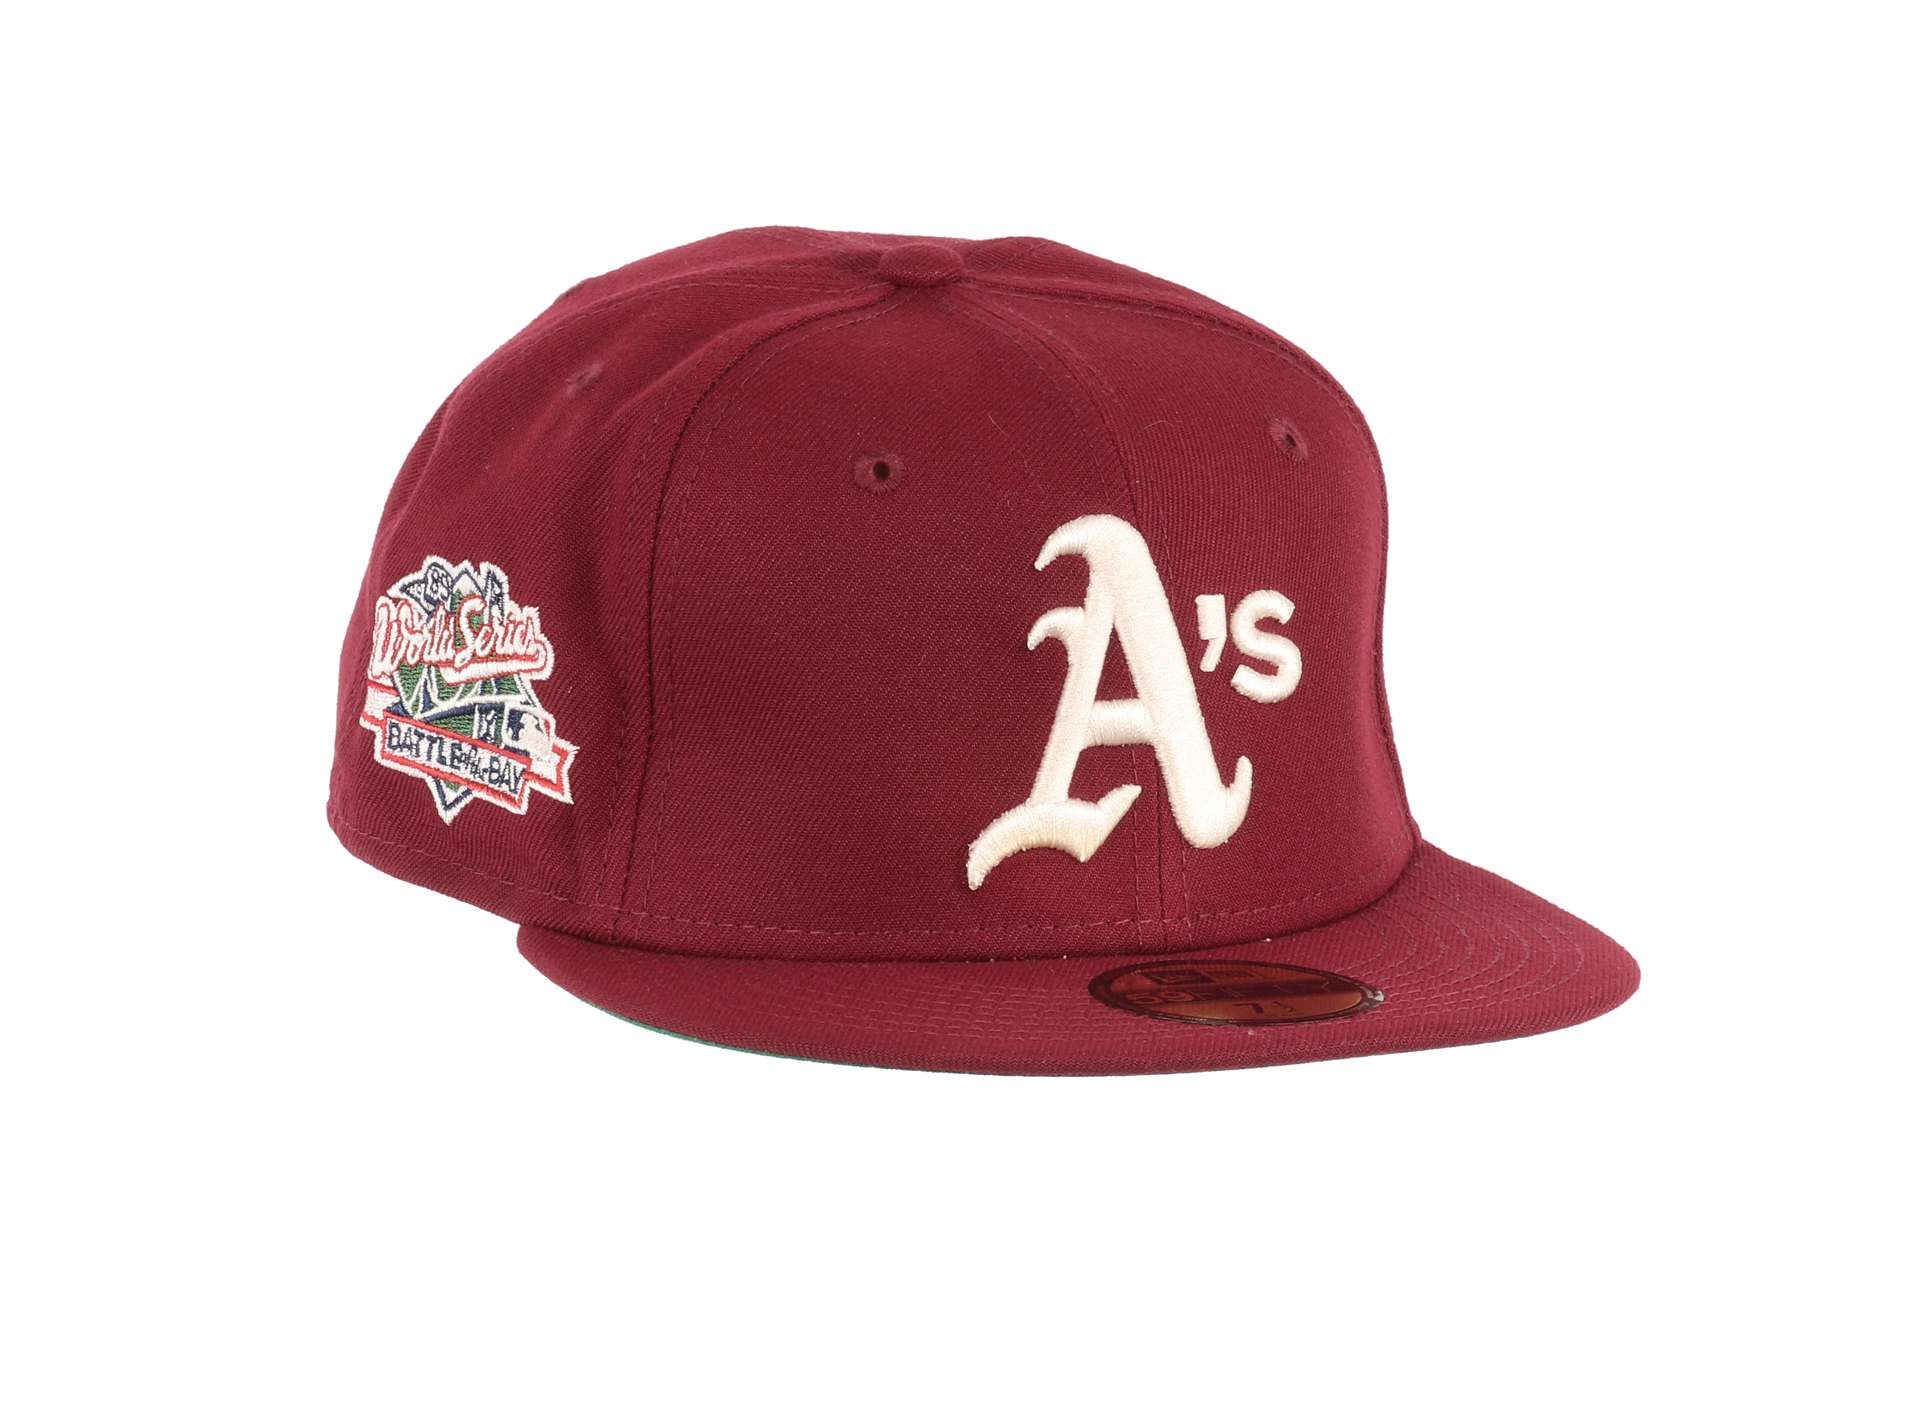 Oakland Athletics MLB Cooperstown World Series 1989 Sidepatch Red 59Fifty Basecap New Era